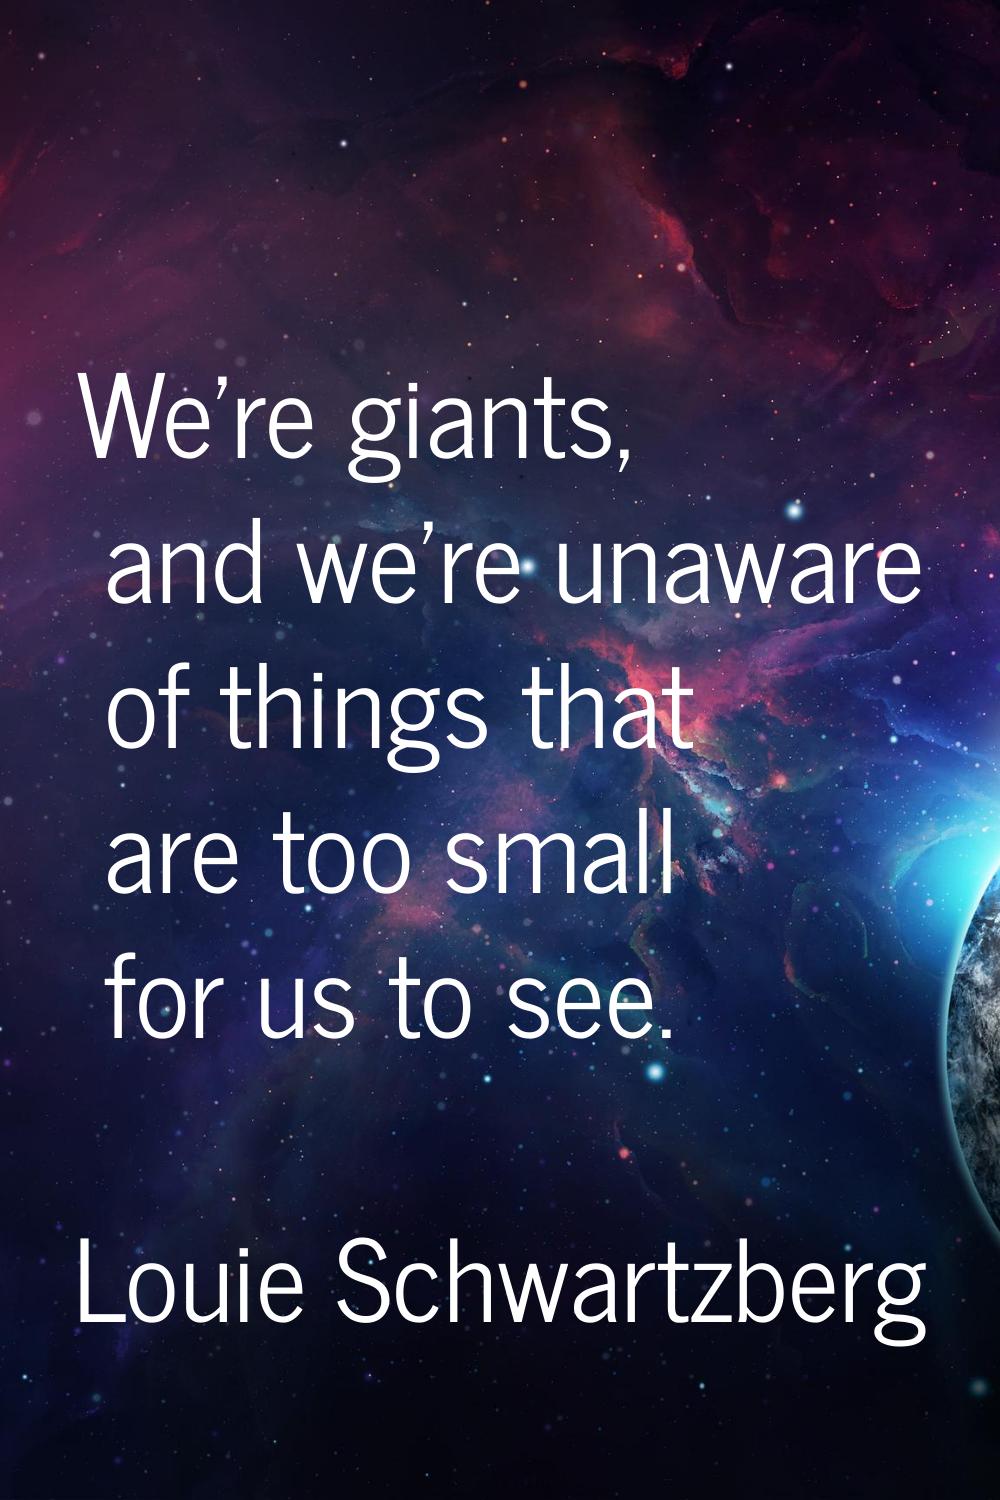 We're giants, and we're unaware of things that are too small for us to see.